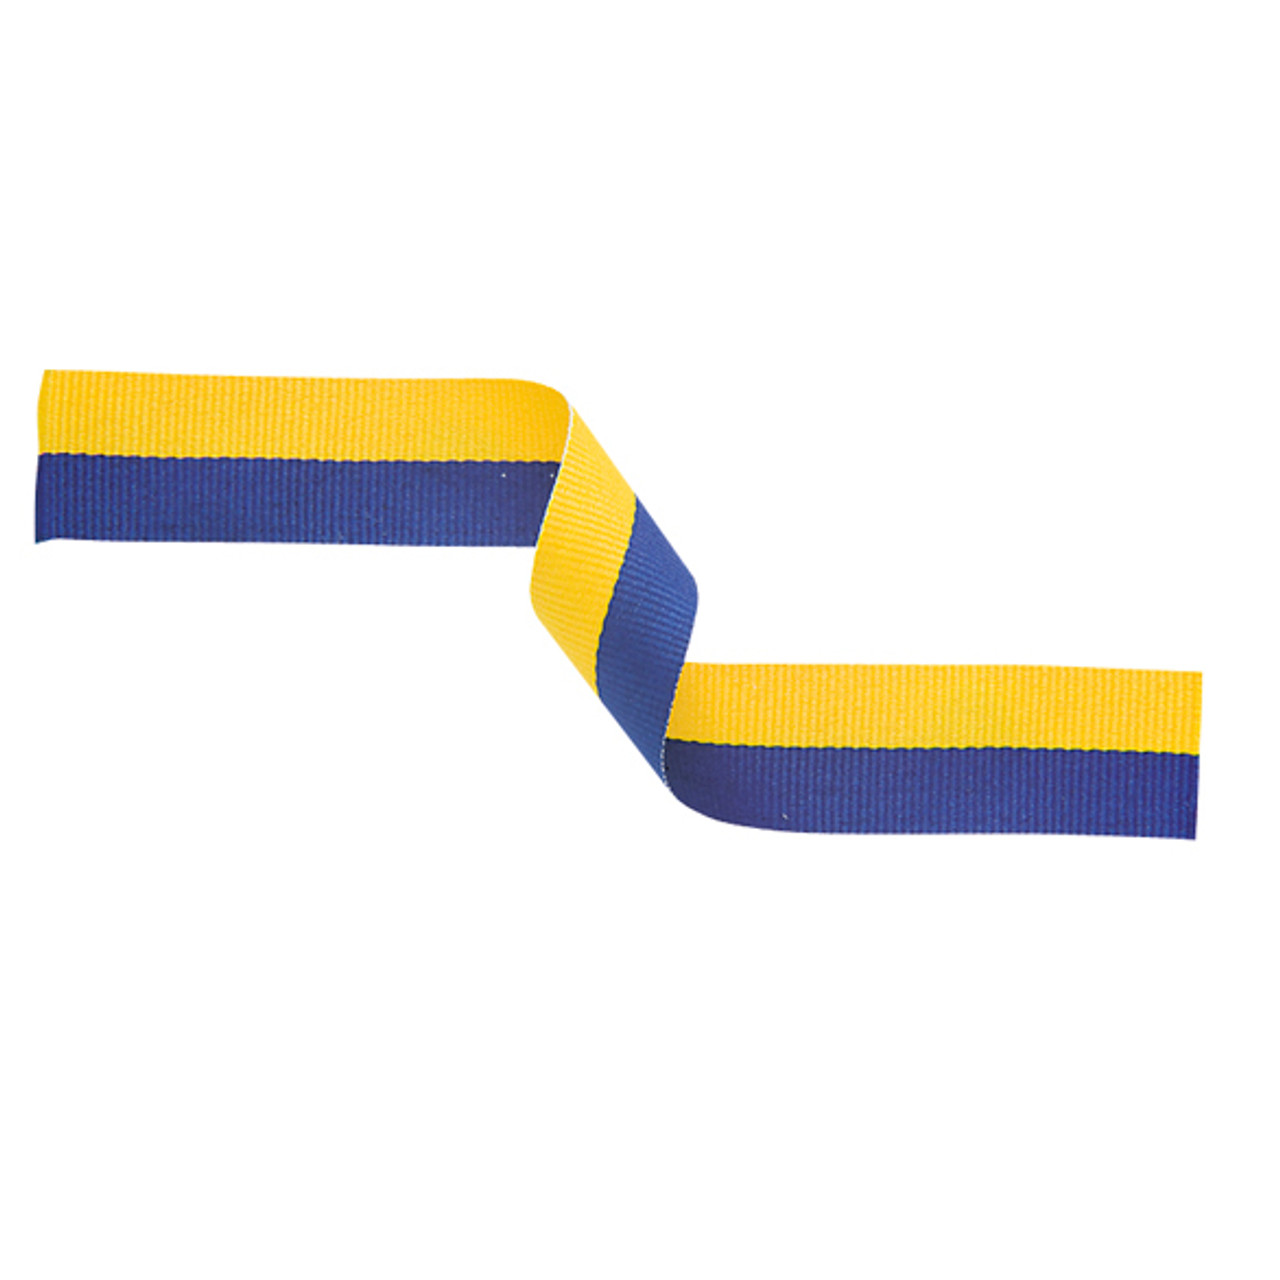 Yellow & Blue Ribbon For Medal Awards